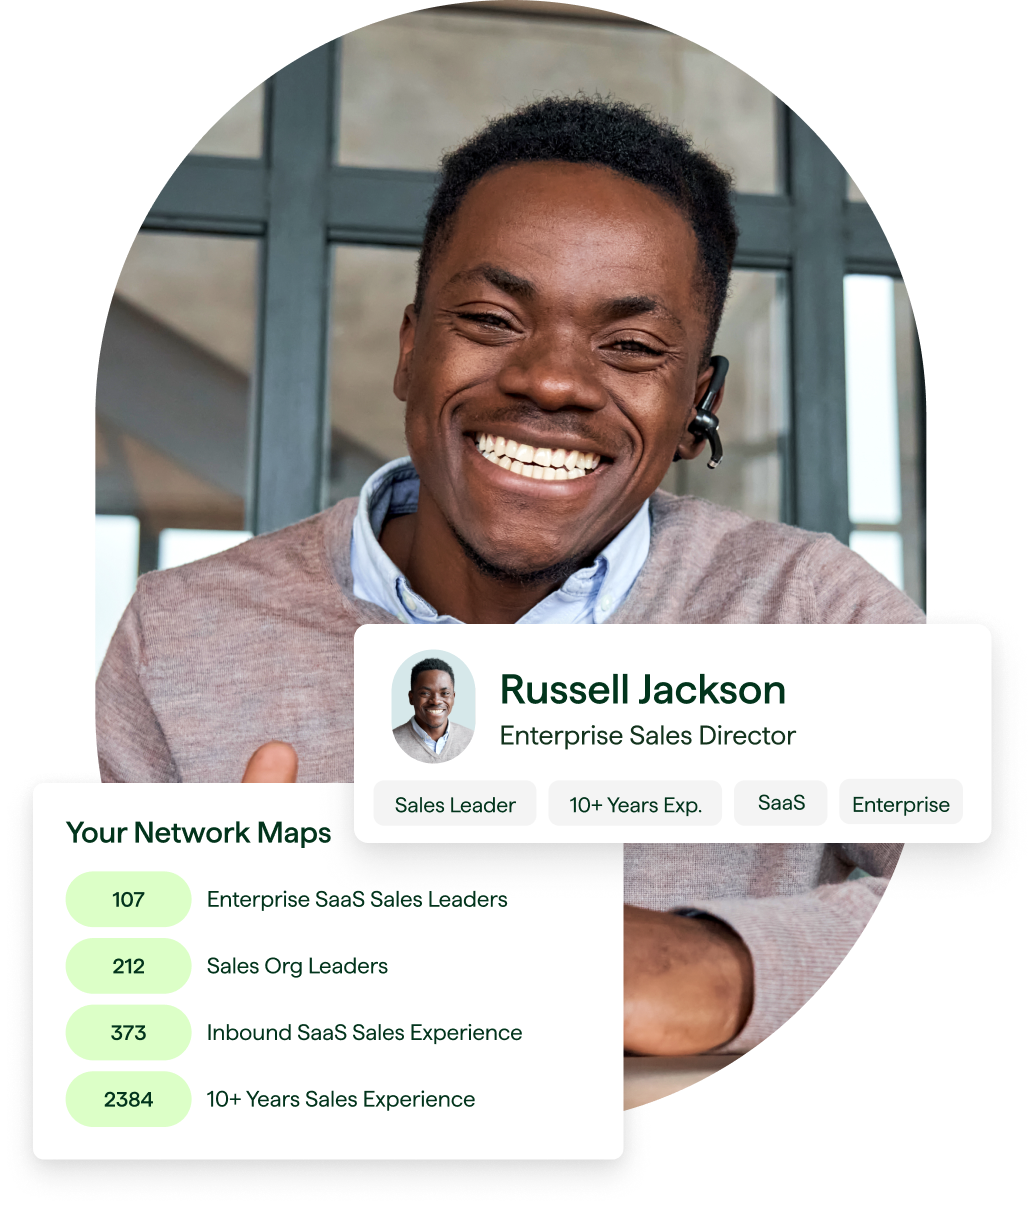 Portrait of man smiling with a headset overlayed with an image tile displaying the man's name, title, and professional attributes. There is a second image tile that shows a venture firm's network map.